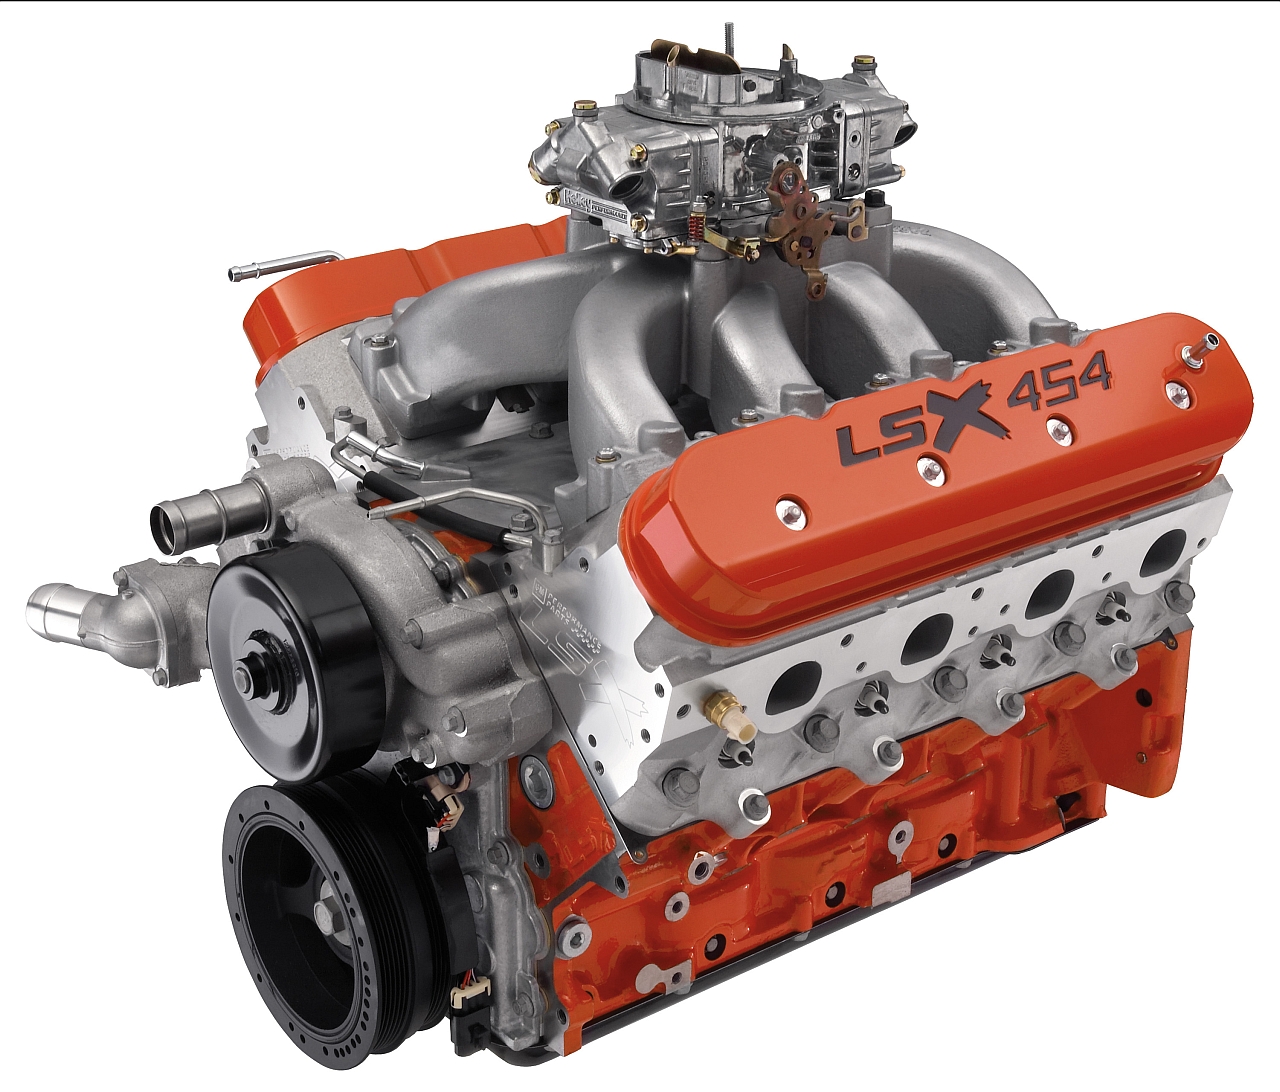 The all-new LSX 454 crate engine uses LSX forged rotating parts and a newly developed 0.635-inch-lift hydraulic roller cam, making this a monster LS engine in a classic cubic-inch combo. Through its four-barrel carburetor, itÕs rated at 620 horsepower.  X09SP_PA014